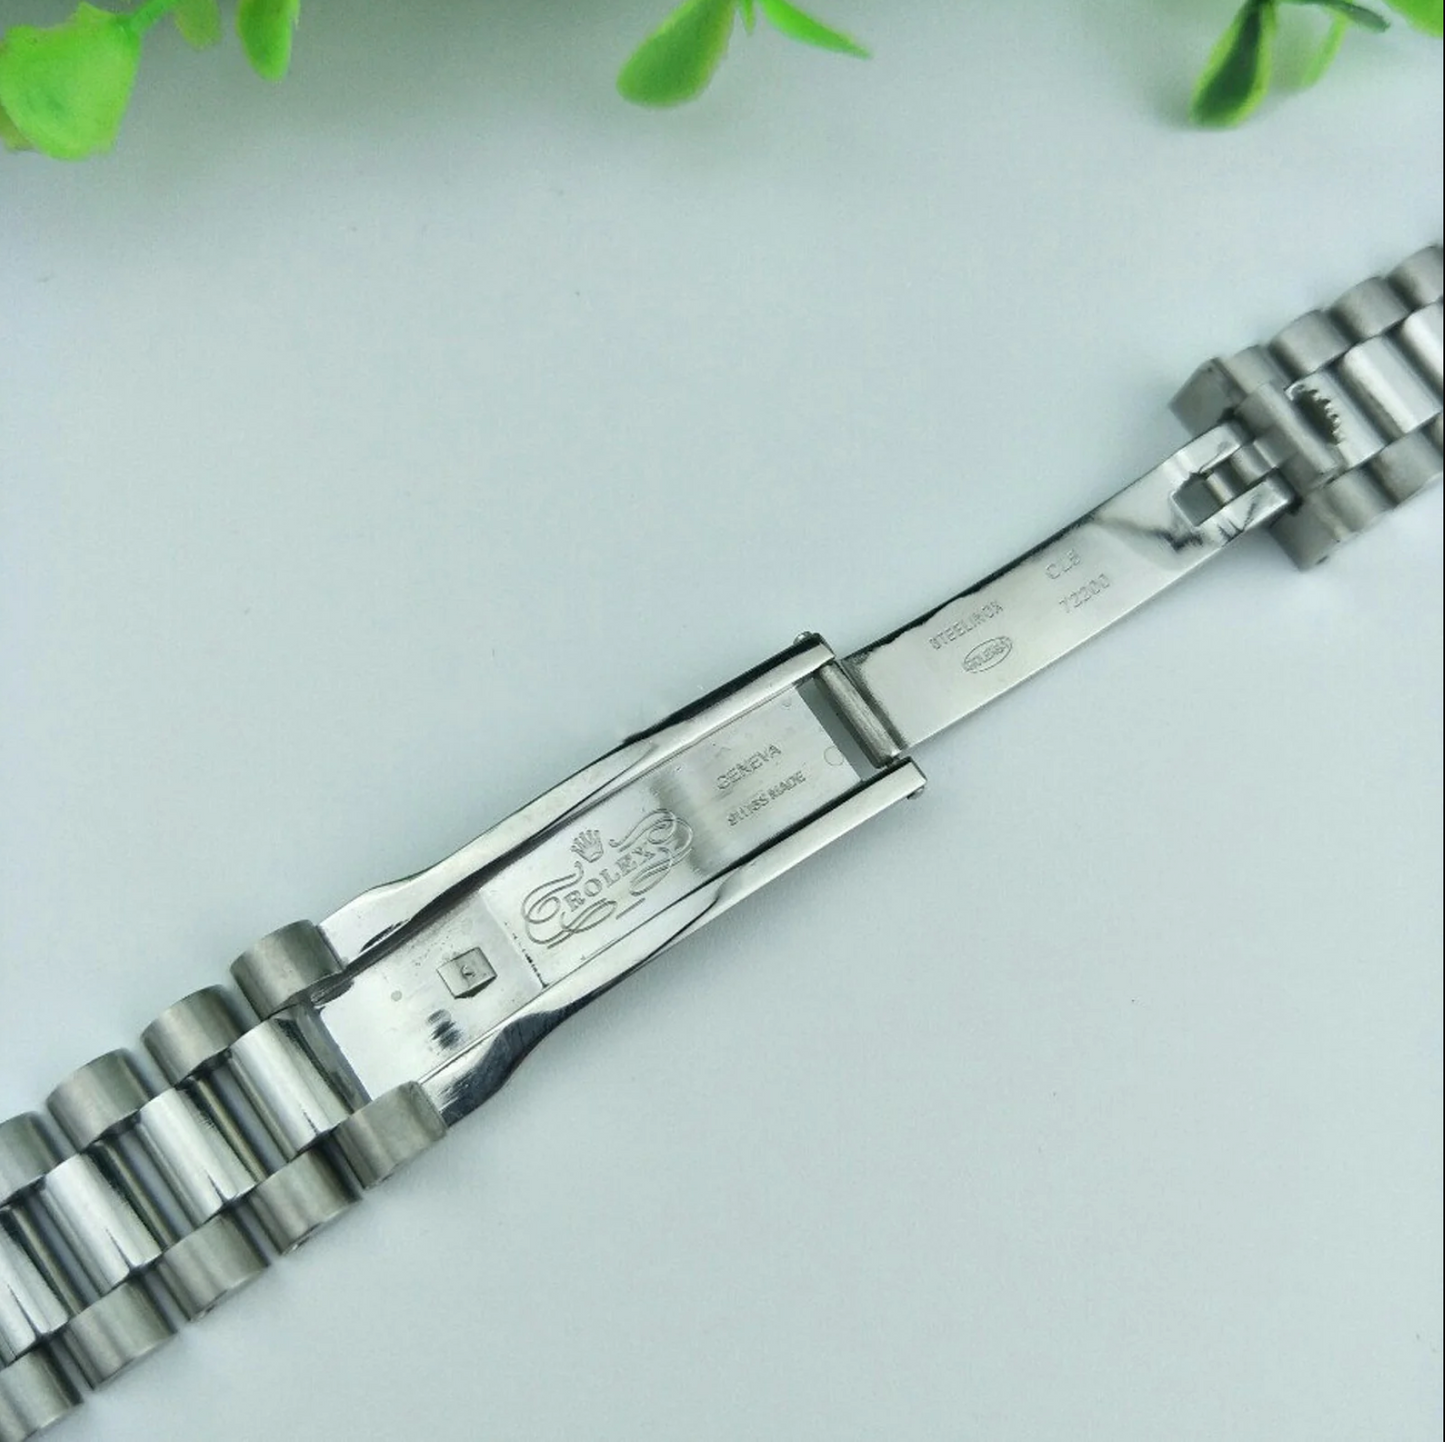 13mm/17mm/20mm Rolex President Steel Strap Rolex Oyster Bracelet Band For Rolex Datejust Series With Stainless Steel Folding Clasp Buckle